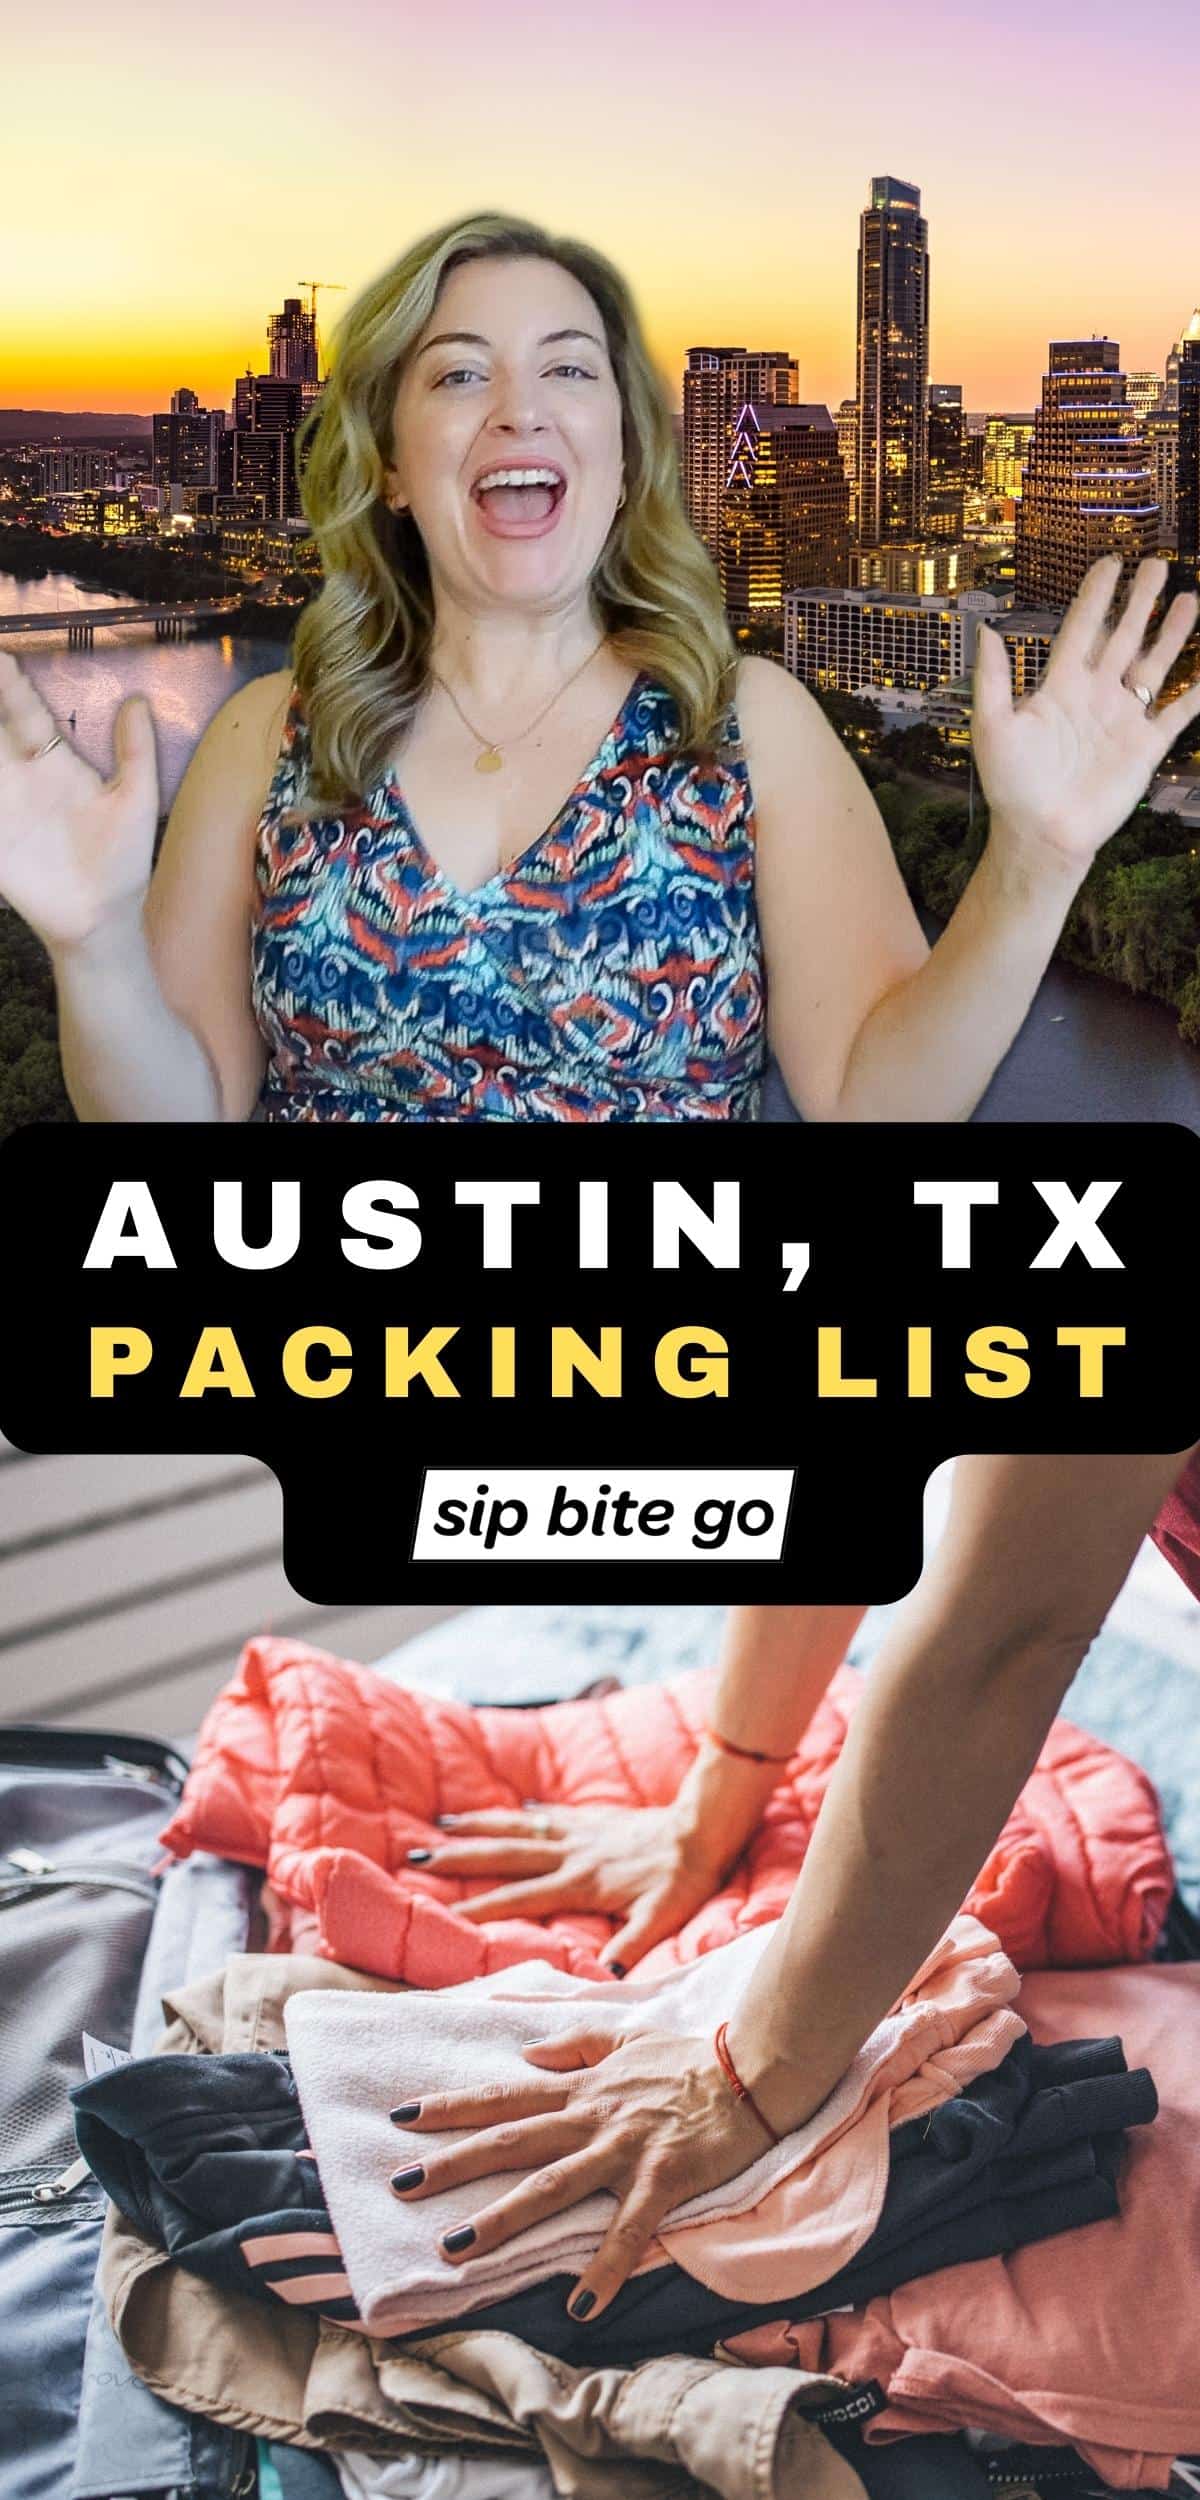 Austin Texas Packing List For Family with Toddler Kids with text overlay Sip Bite Go